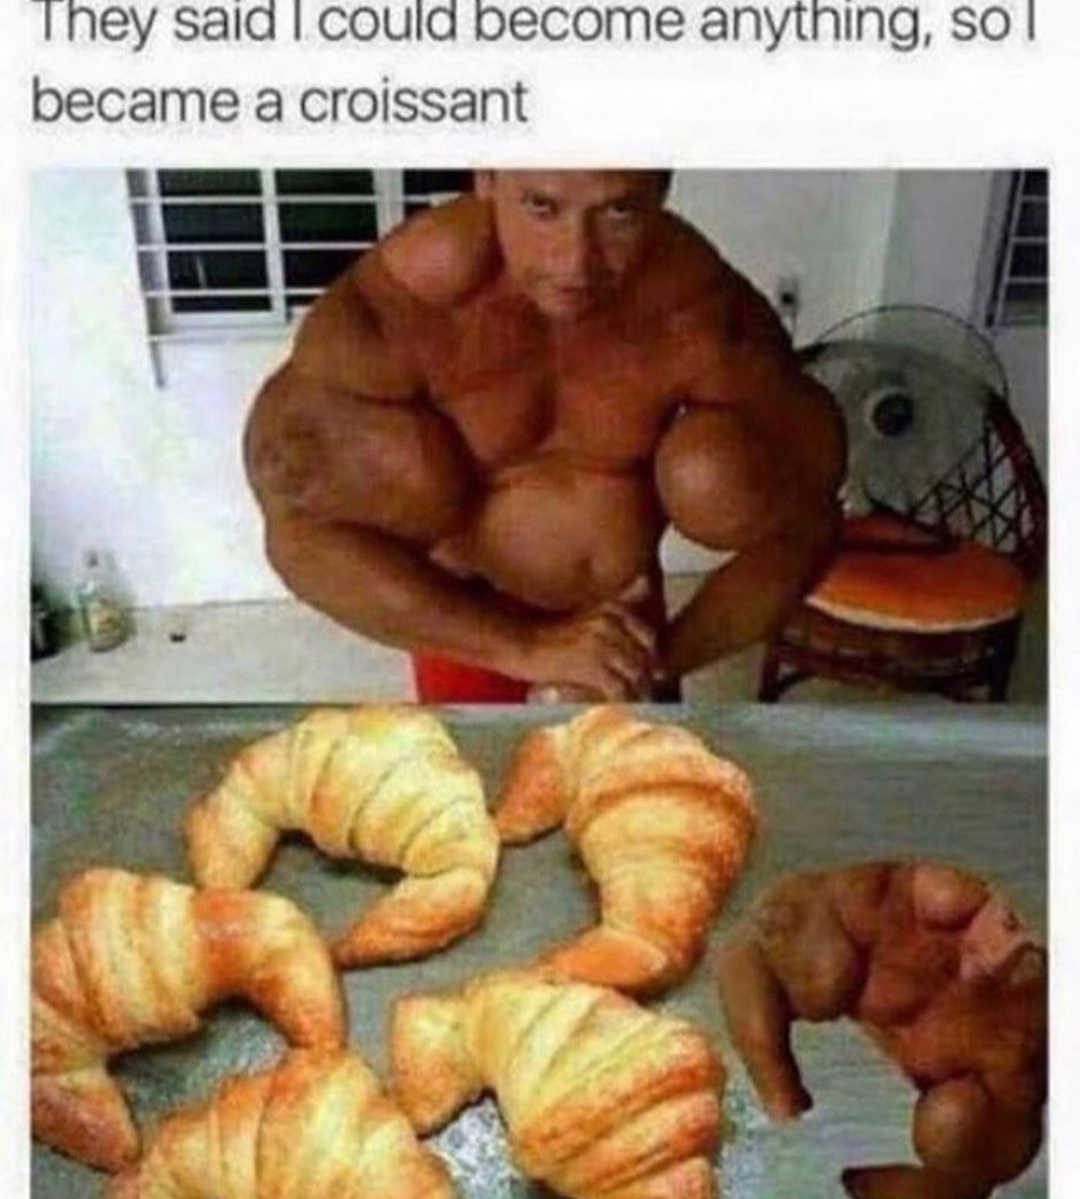 bodybuilder croissant meme - They said I could become anything, so became a croissant